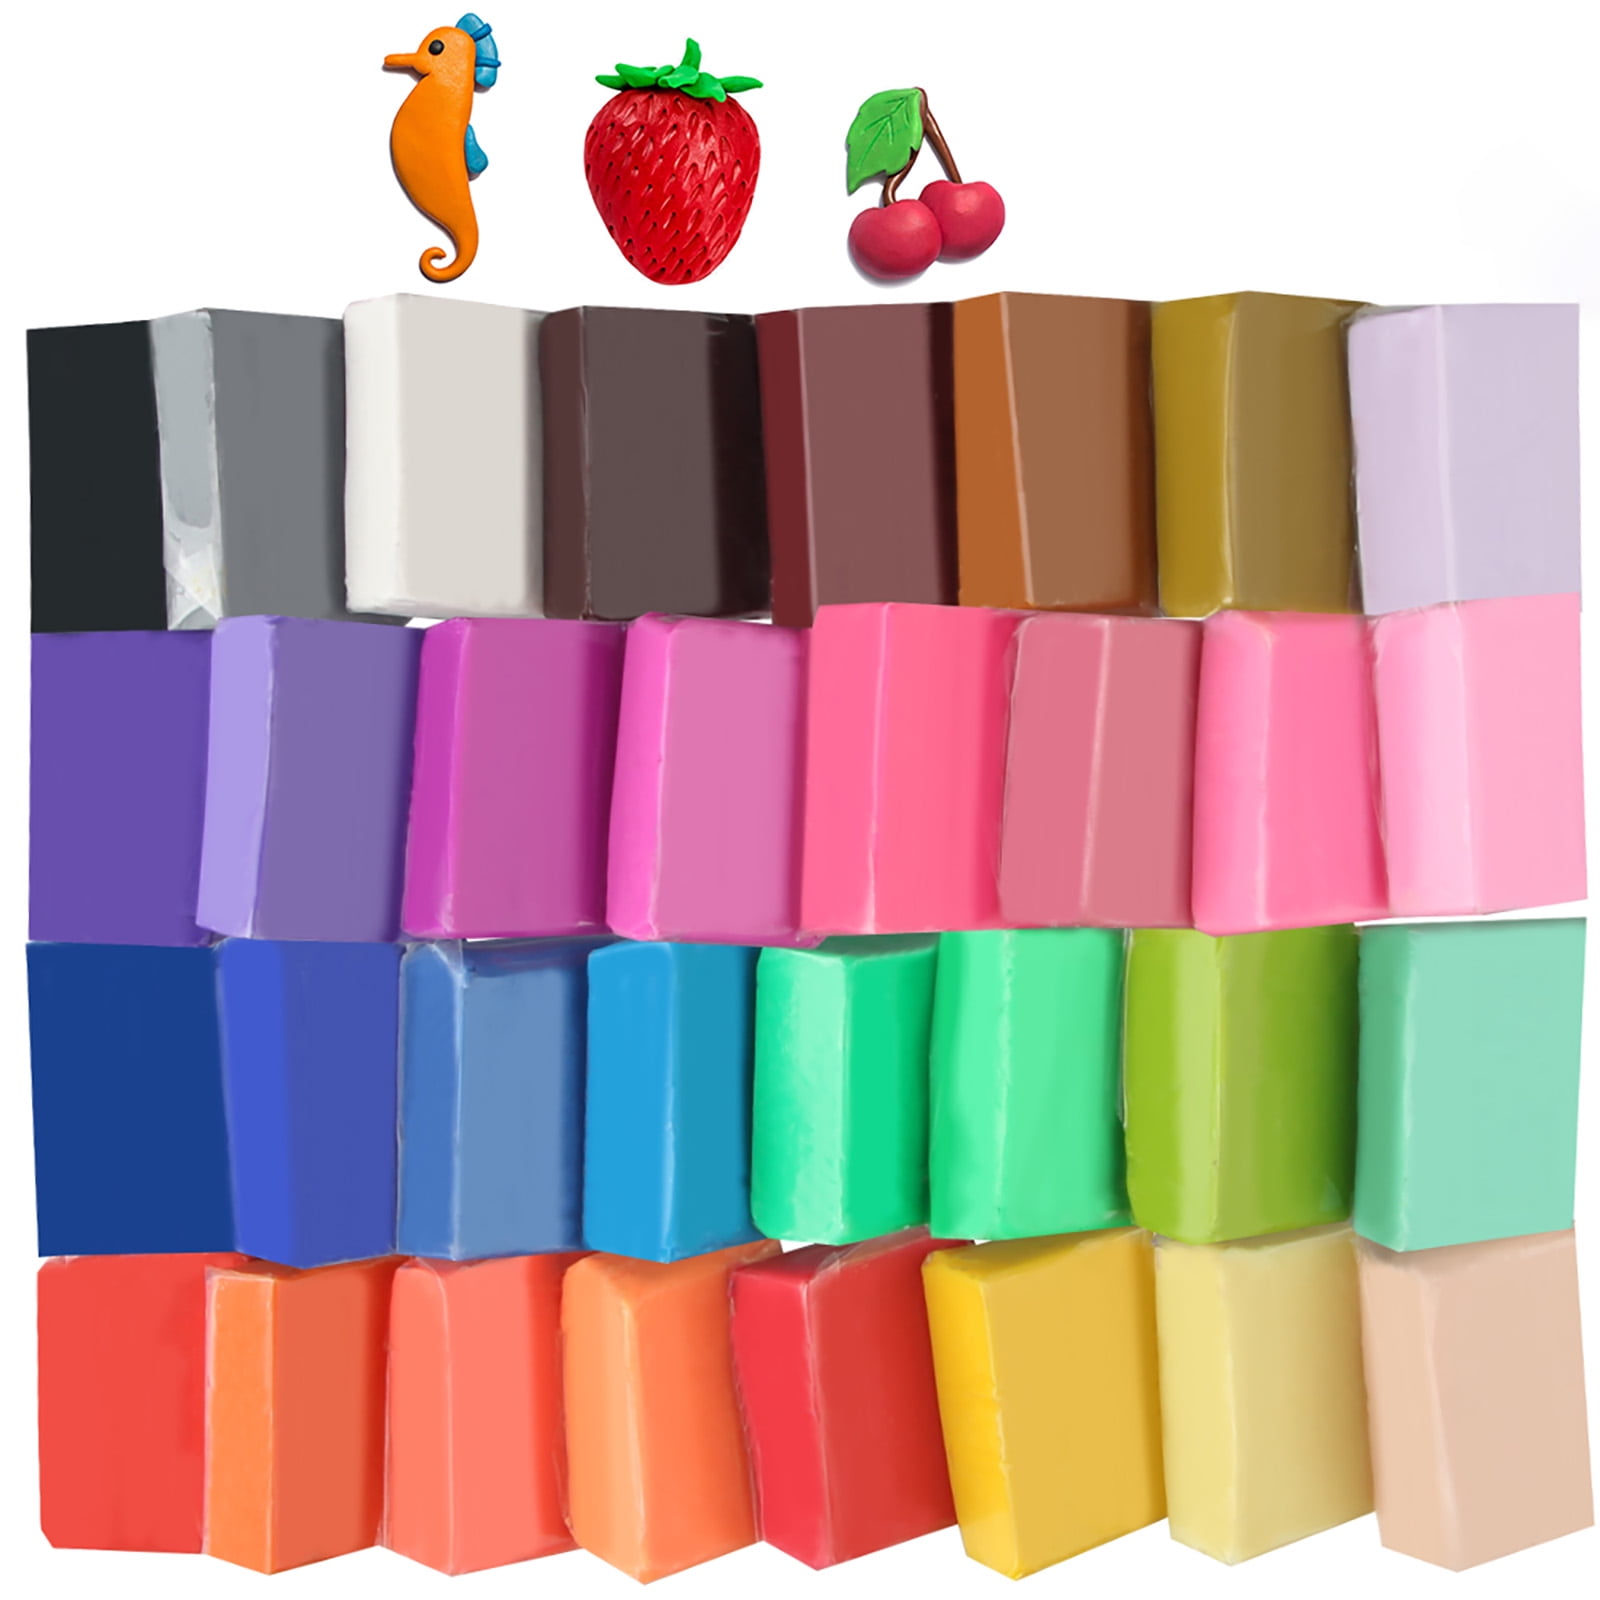 32 Colors Small Block Polymer Clay Set Oven Bake Clay Non-Toxic Molding DIY  Clay for Kids, Artists (Softer) 